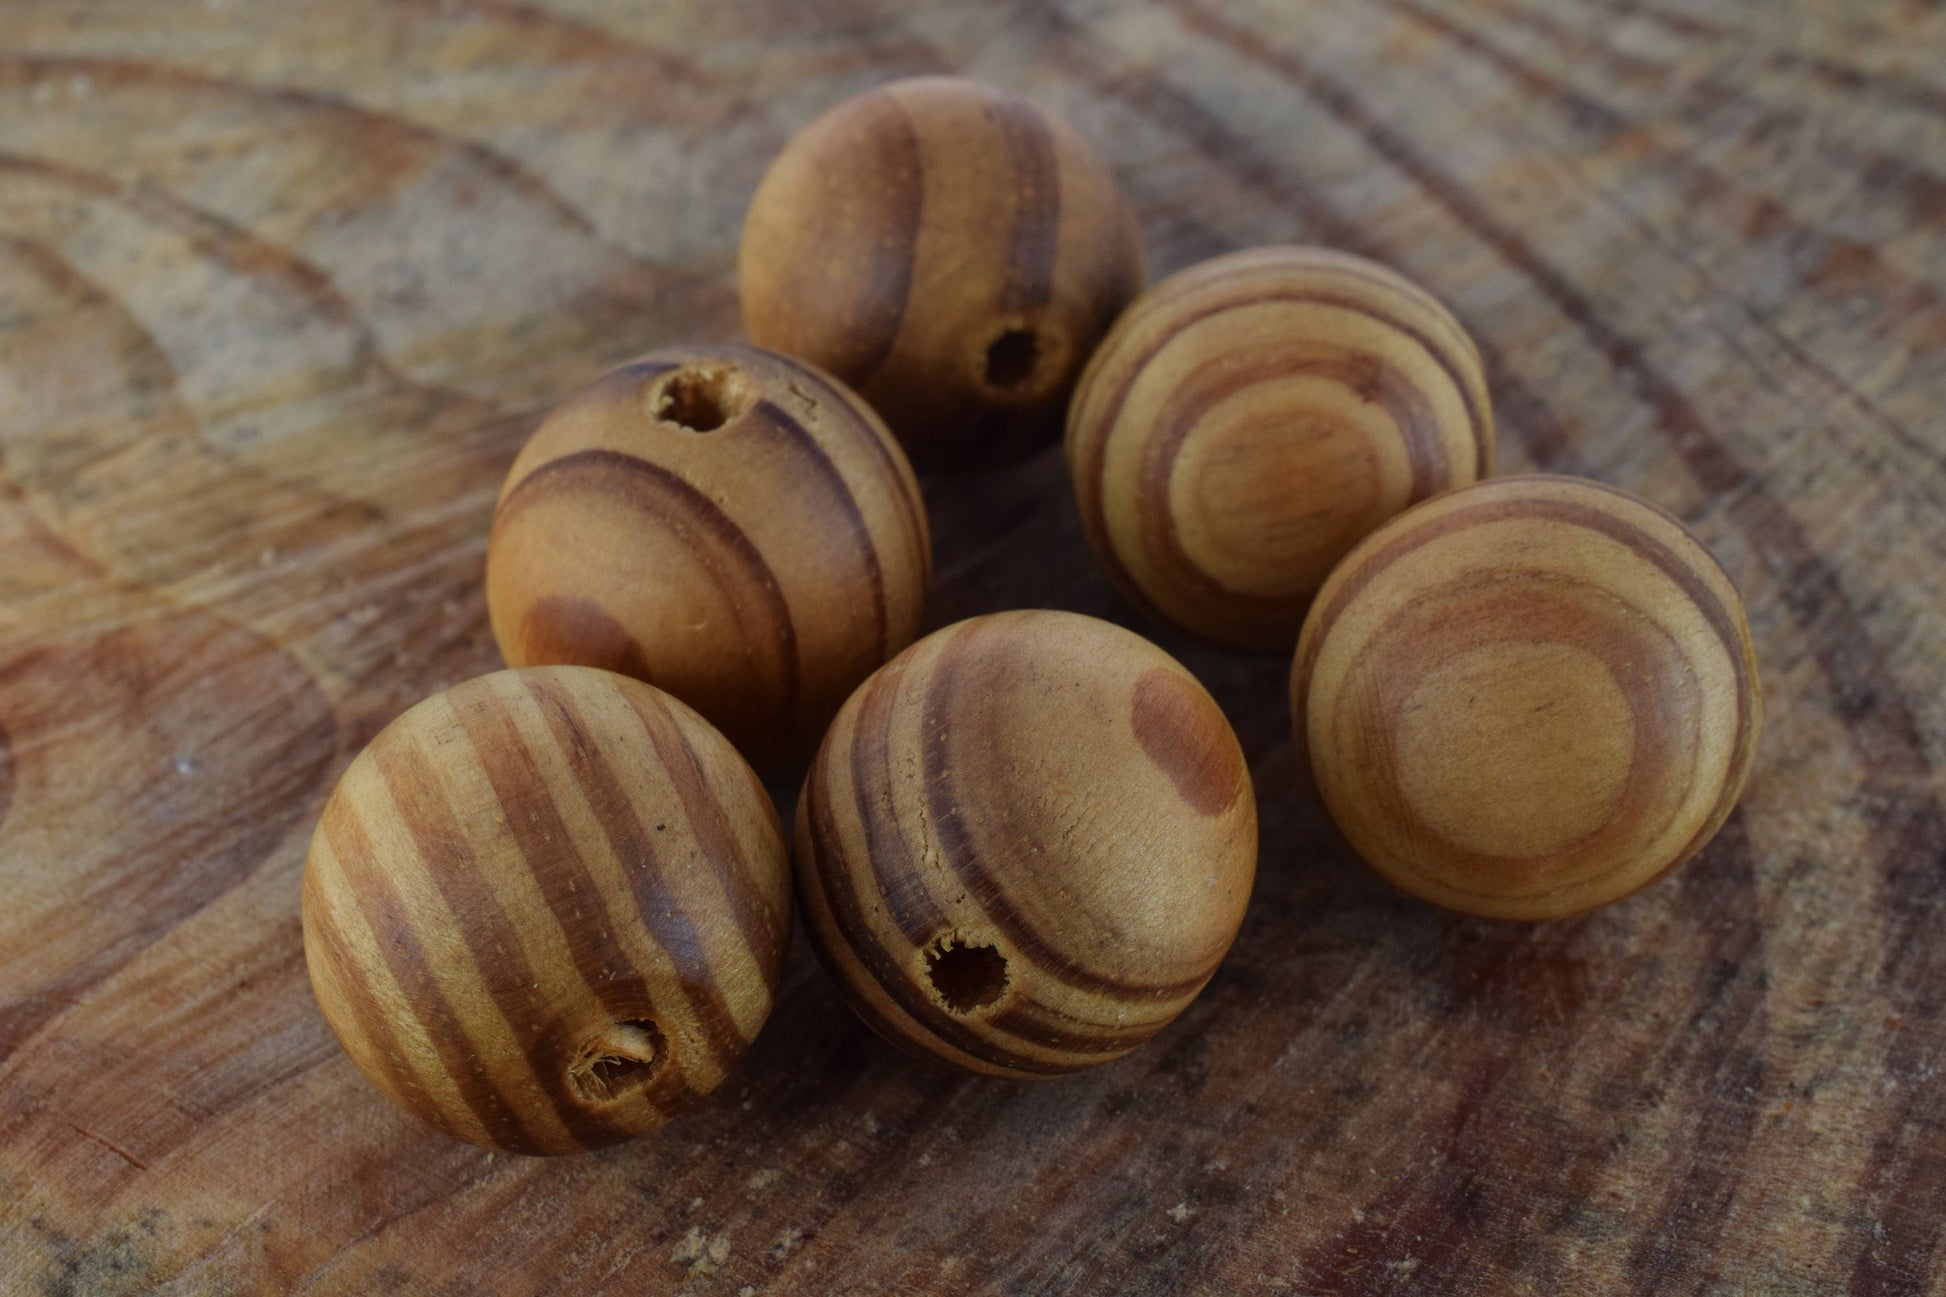 17mm Round Wooden Beads, Sold by 6pcs, High Quality Wood Beads,Raw Finished Wood Beads,Wood Craft Beads,Loose Wooden Beads,Nursing Necklace